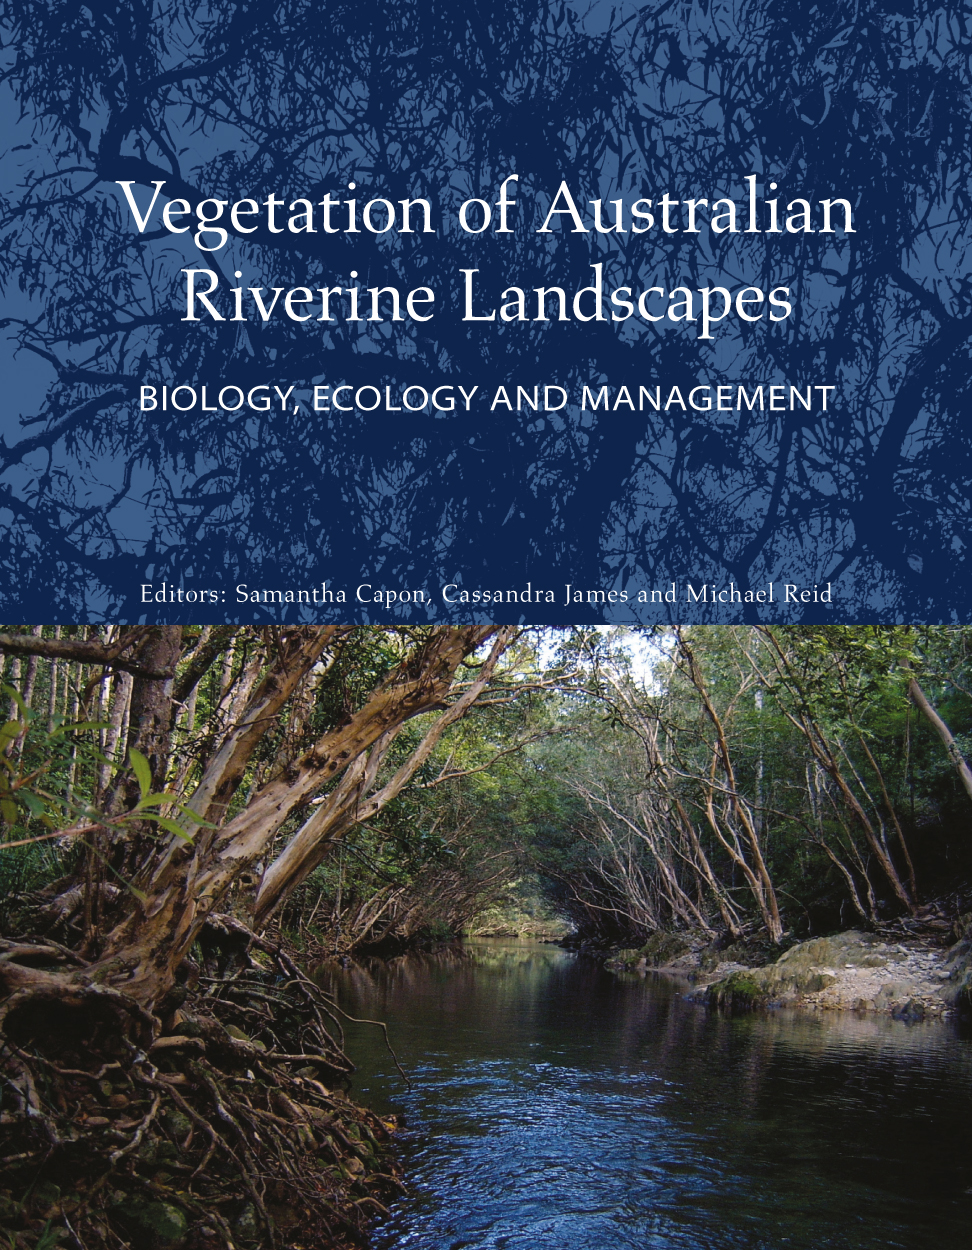 Cover image featuring Kanuka Box trees overarching Behana Creek in the Wet Tropics.